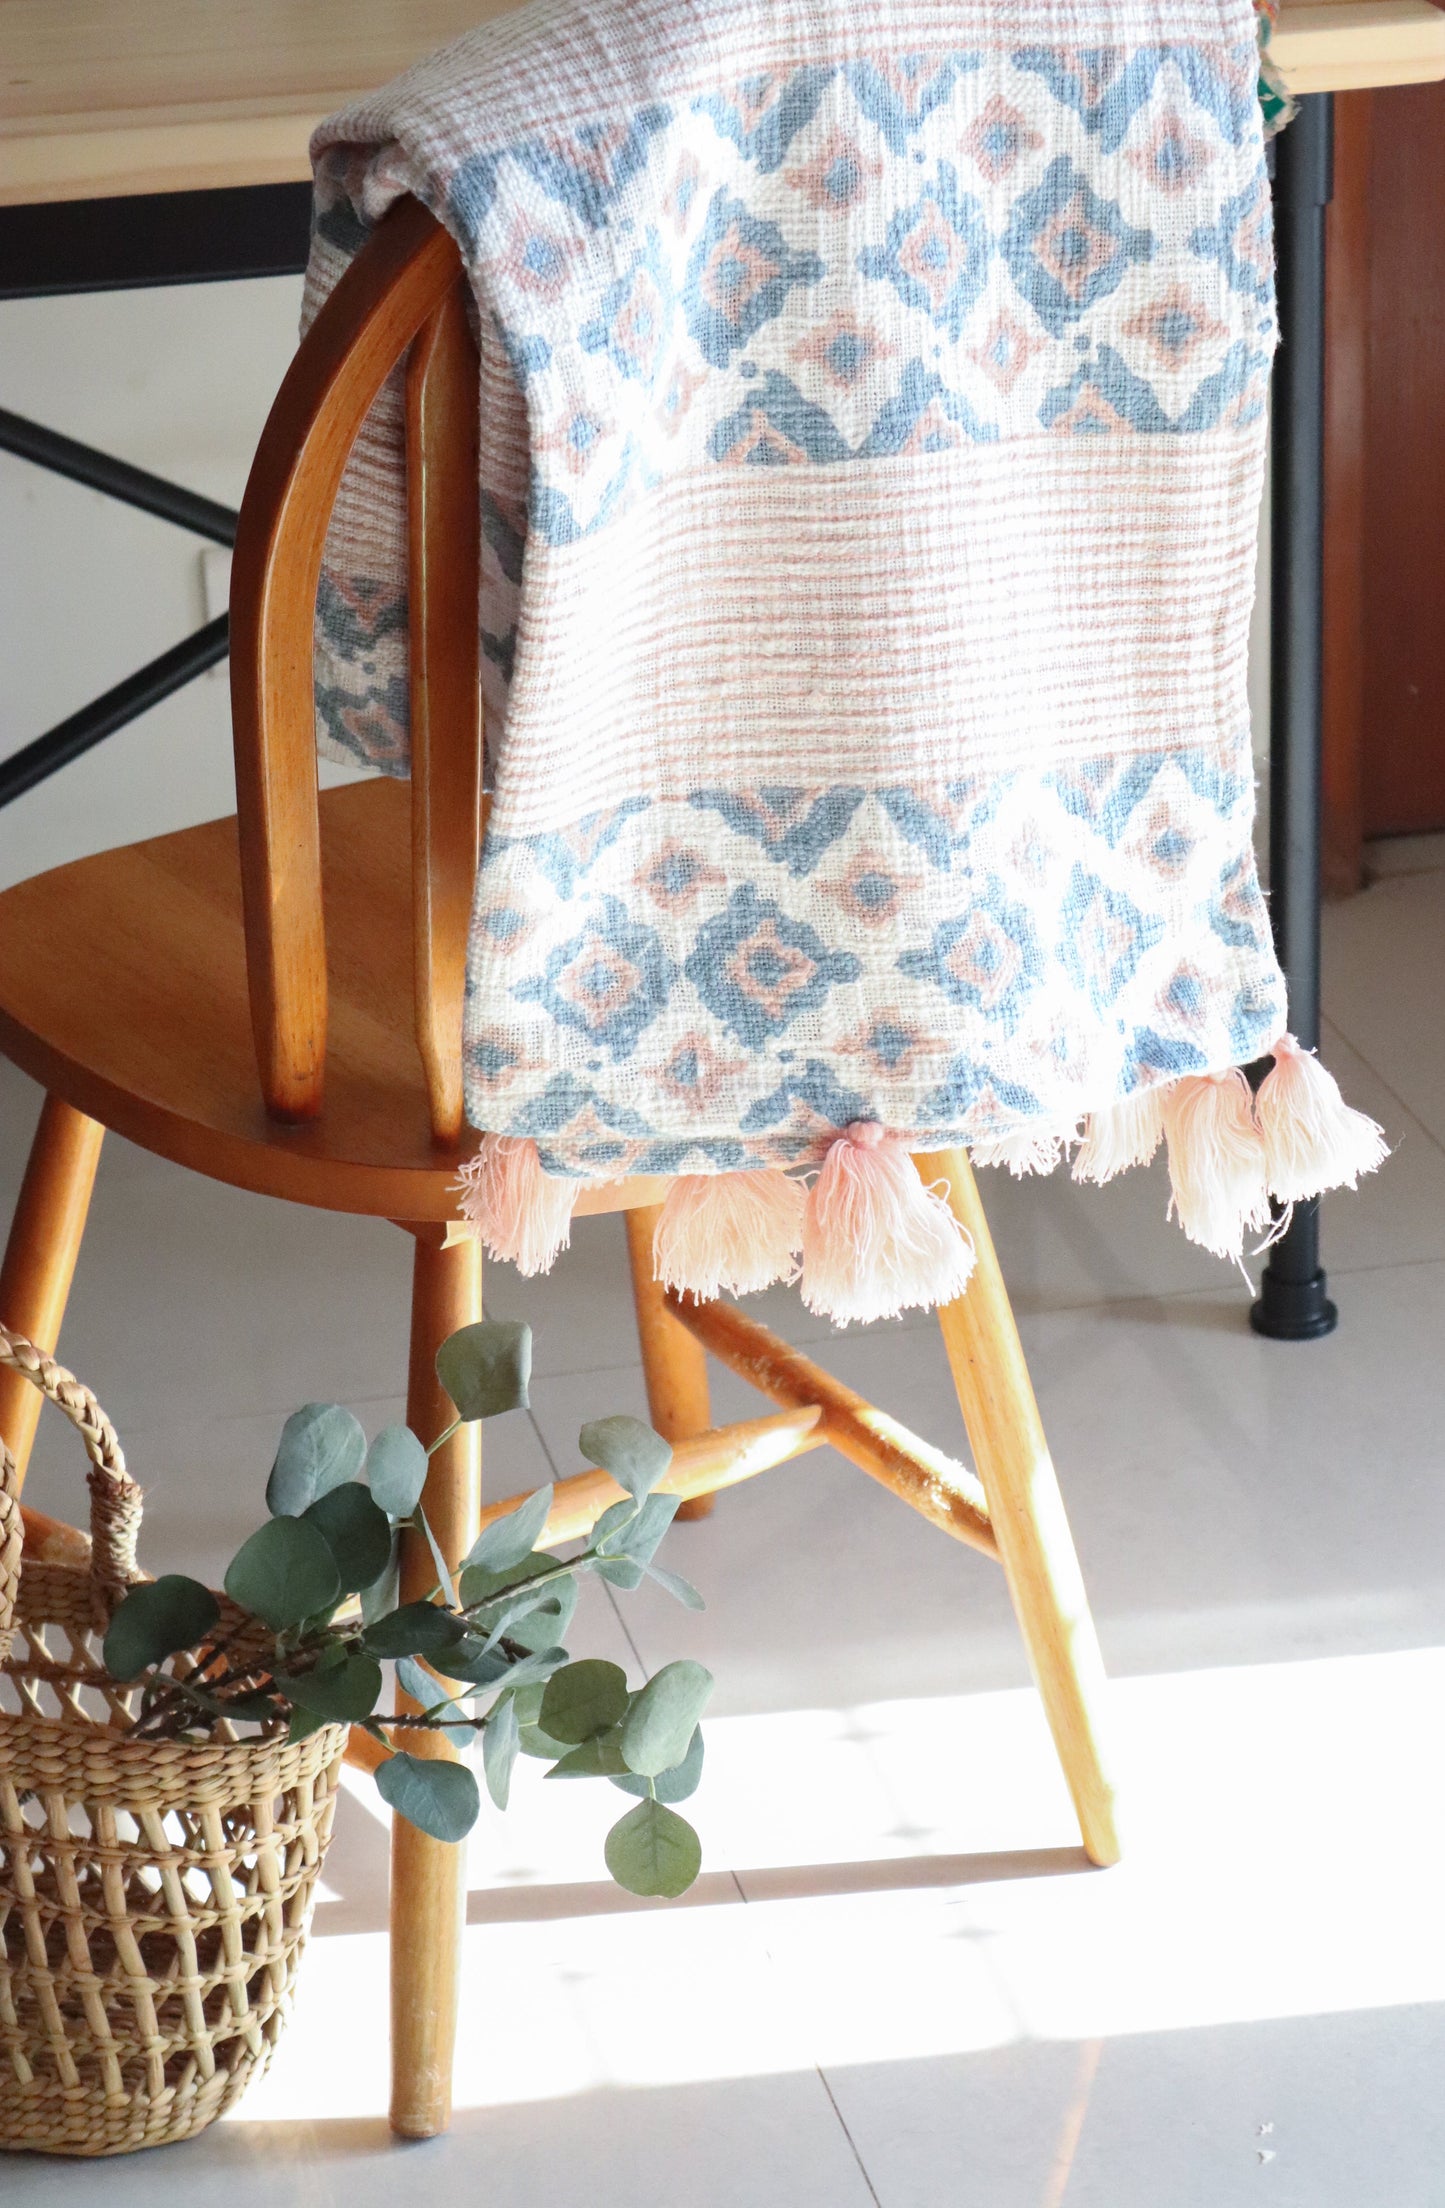 Printed cotton throw blanket - Blue and pink Handloom Cotton throws - sofa throw with tassels - 55x70 inches